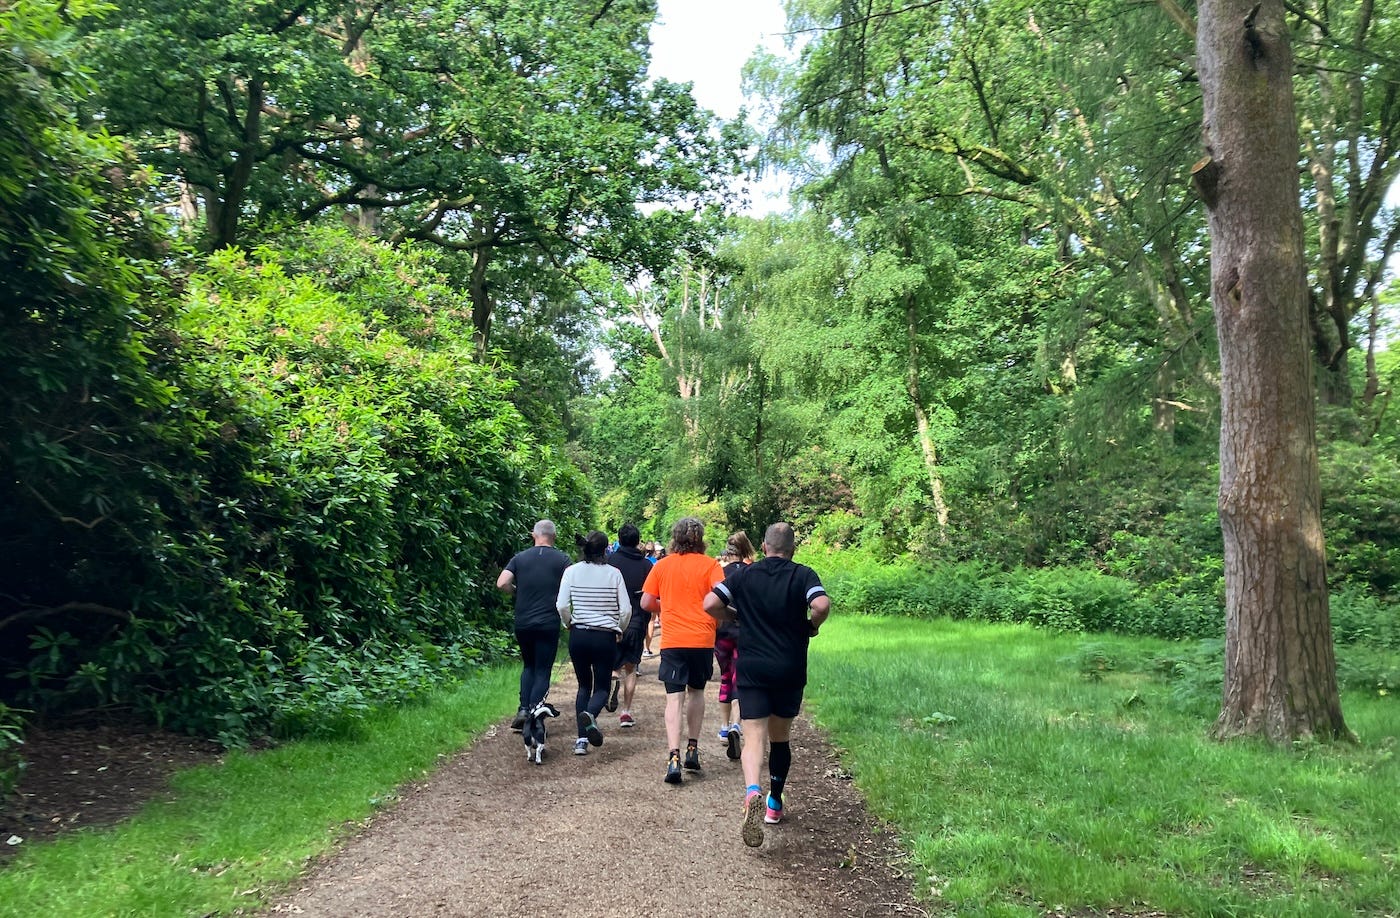 A group of runners on a path through the woods